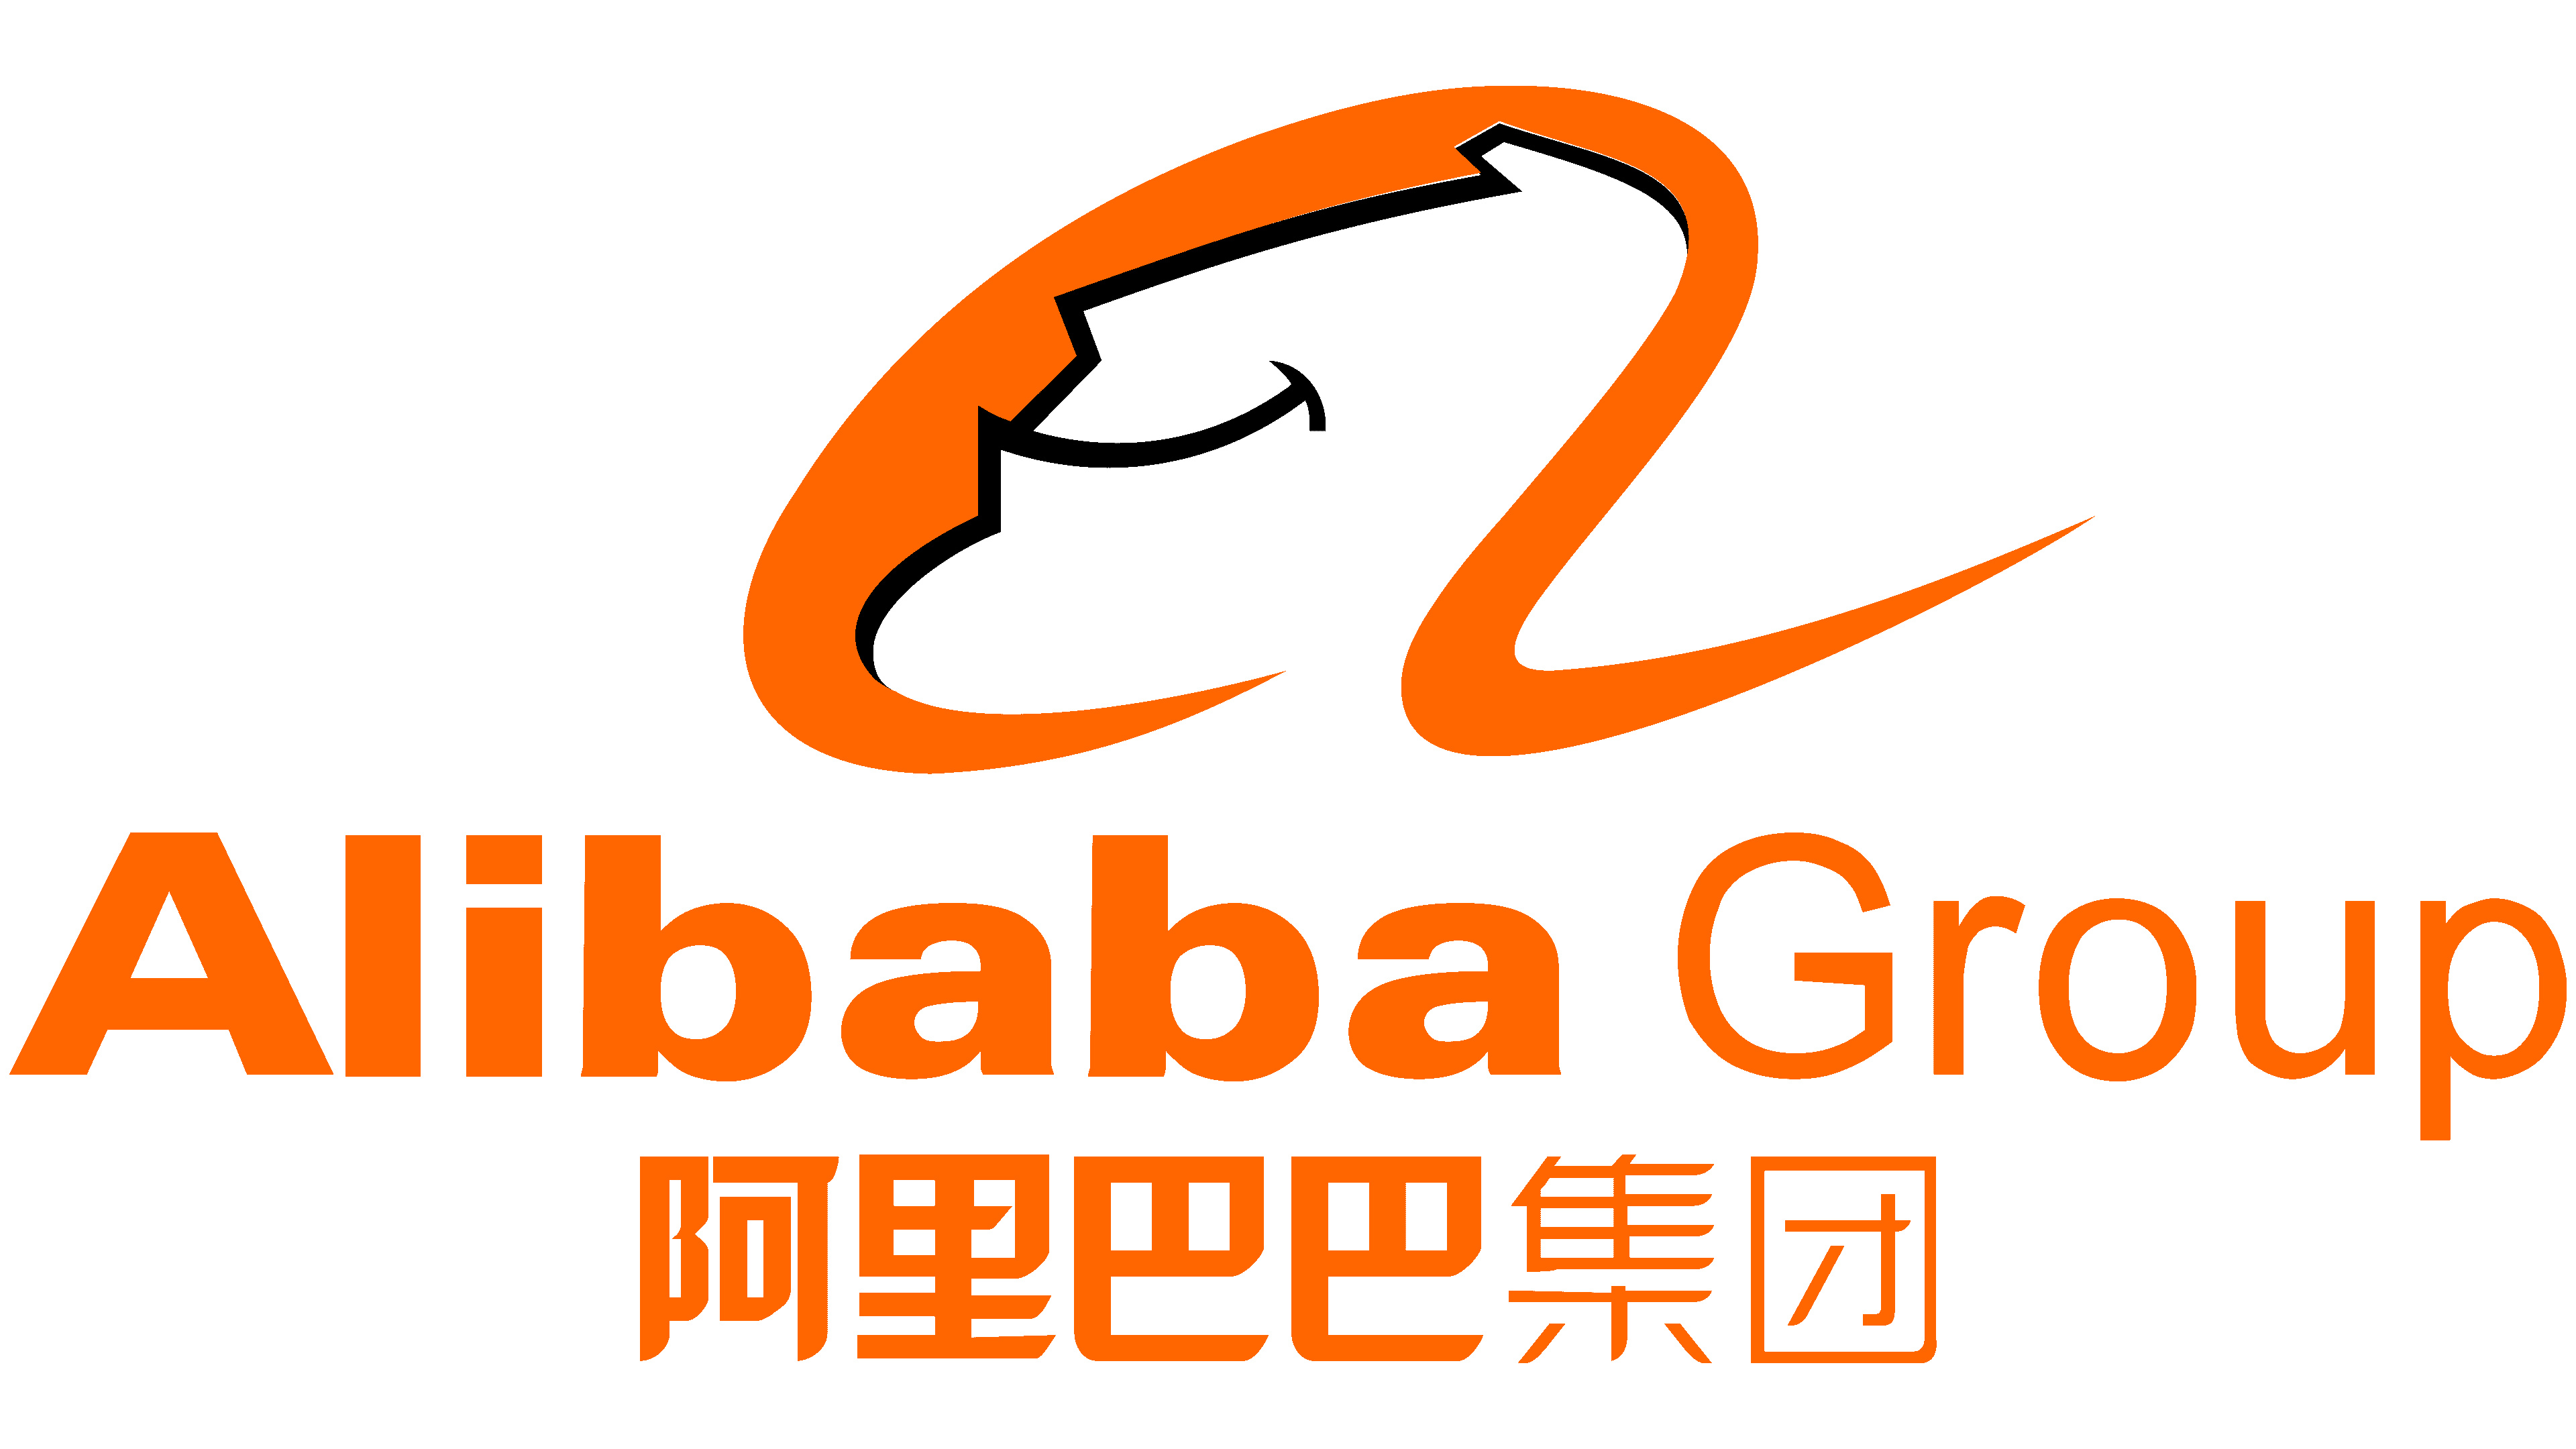 Alibaba Group: A Chinese multinational Internet, and technology company founded on 28 June 1999. 3840x2160 4K Background.